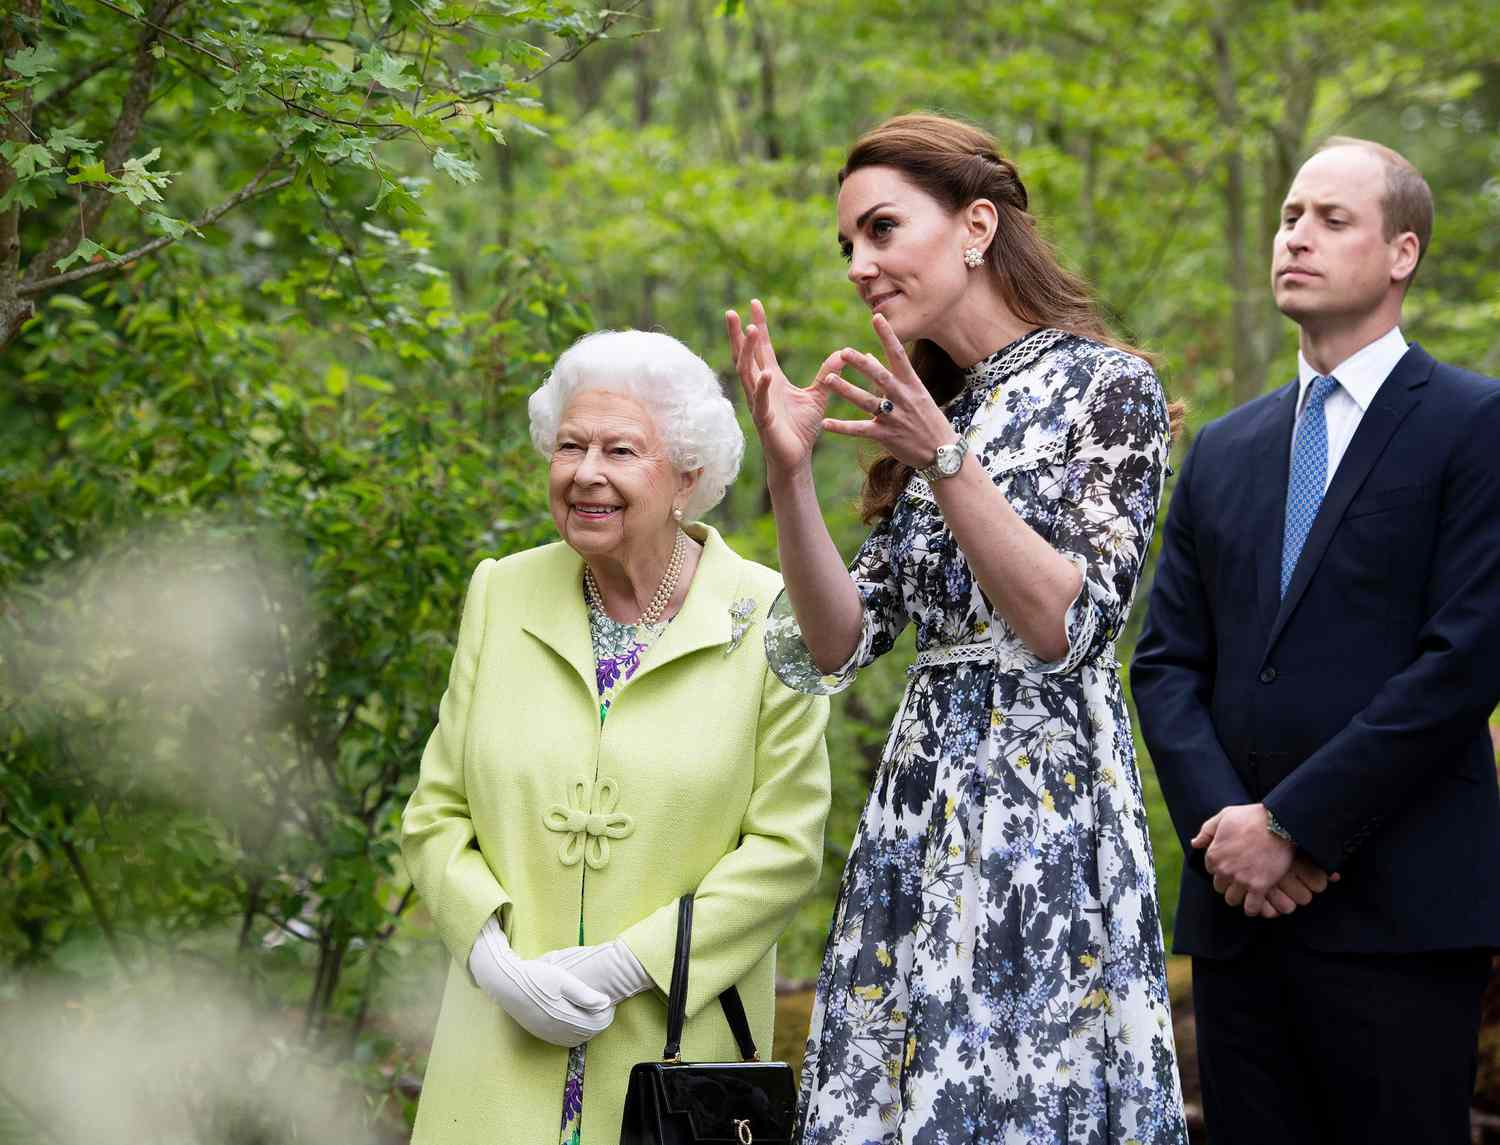 Queen Elizabeth II is shown around 'Back to Nature' by Prince William and Catherine Duchess of Cambridge